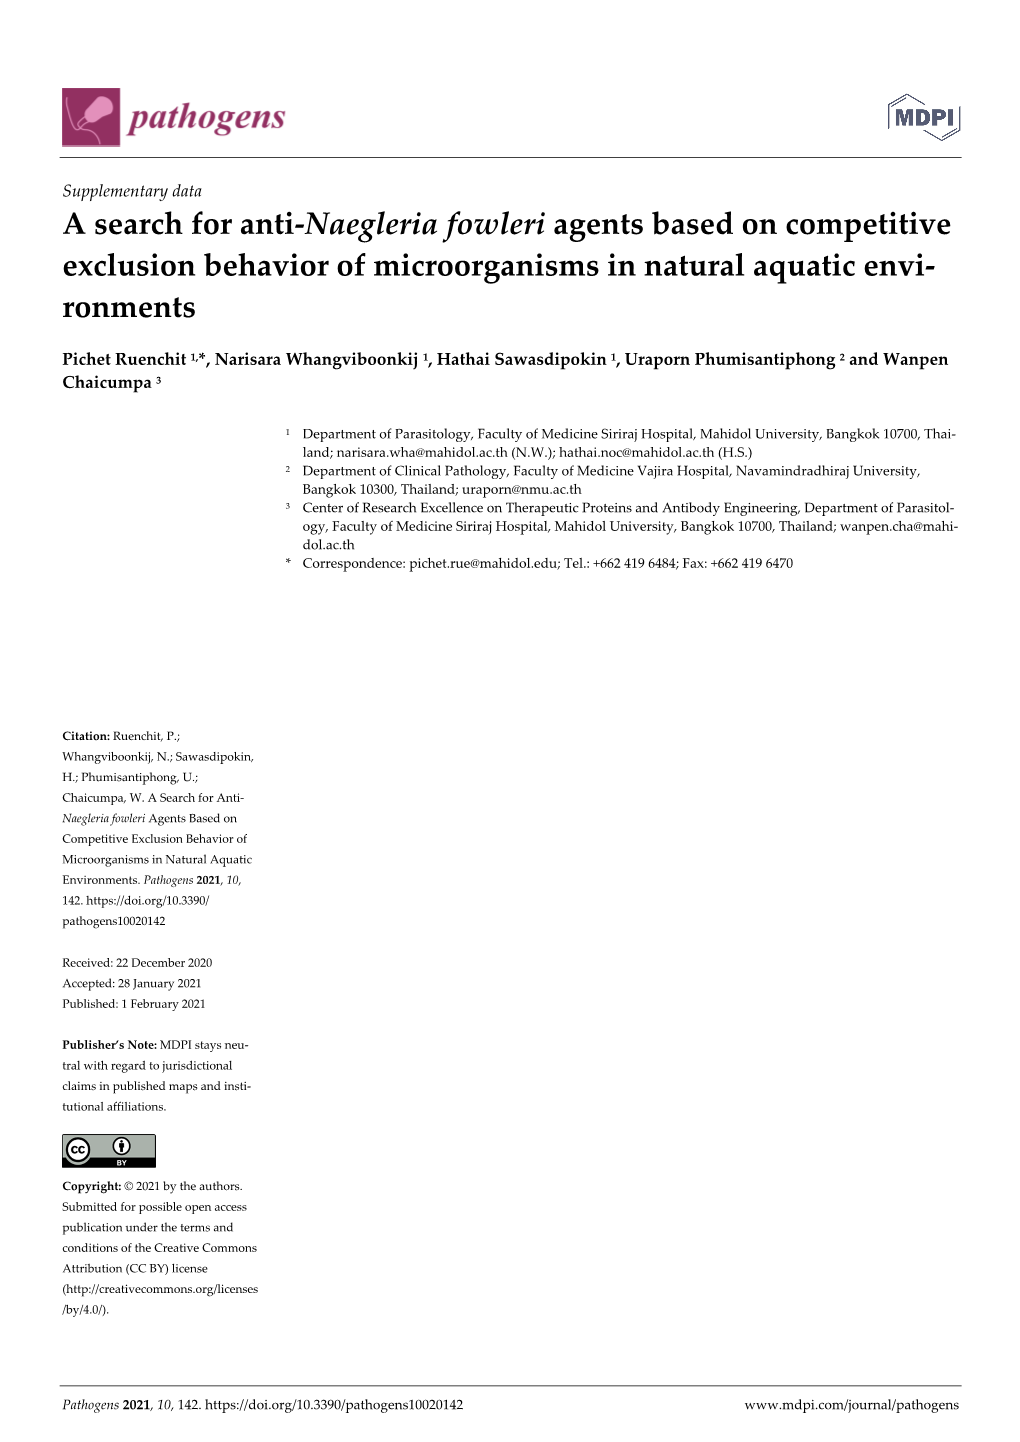 A Search for Anti-Naegleria Fowleri Agents Based on Competitive Exclusion Behavior of Microorganisms in Natural Aquatic Envi- Ronments